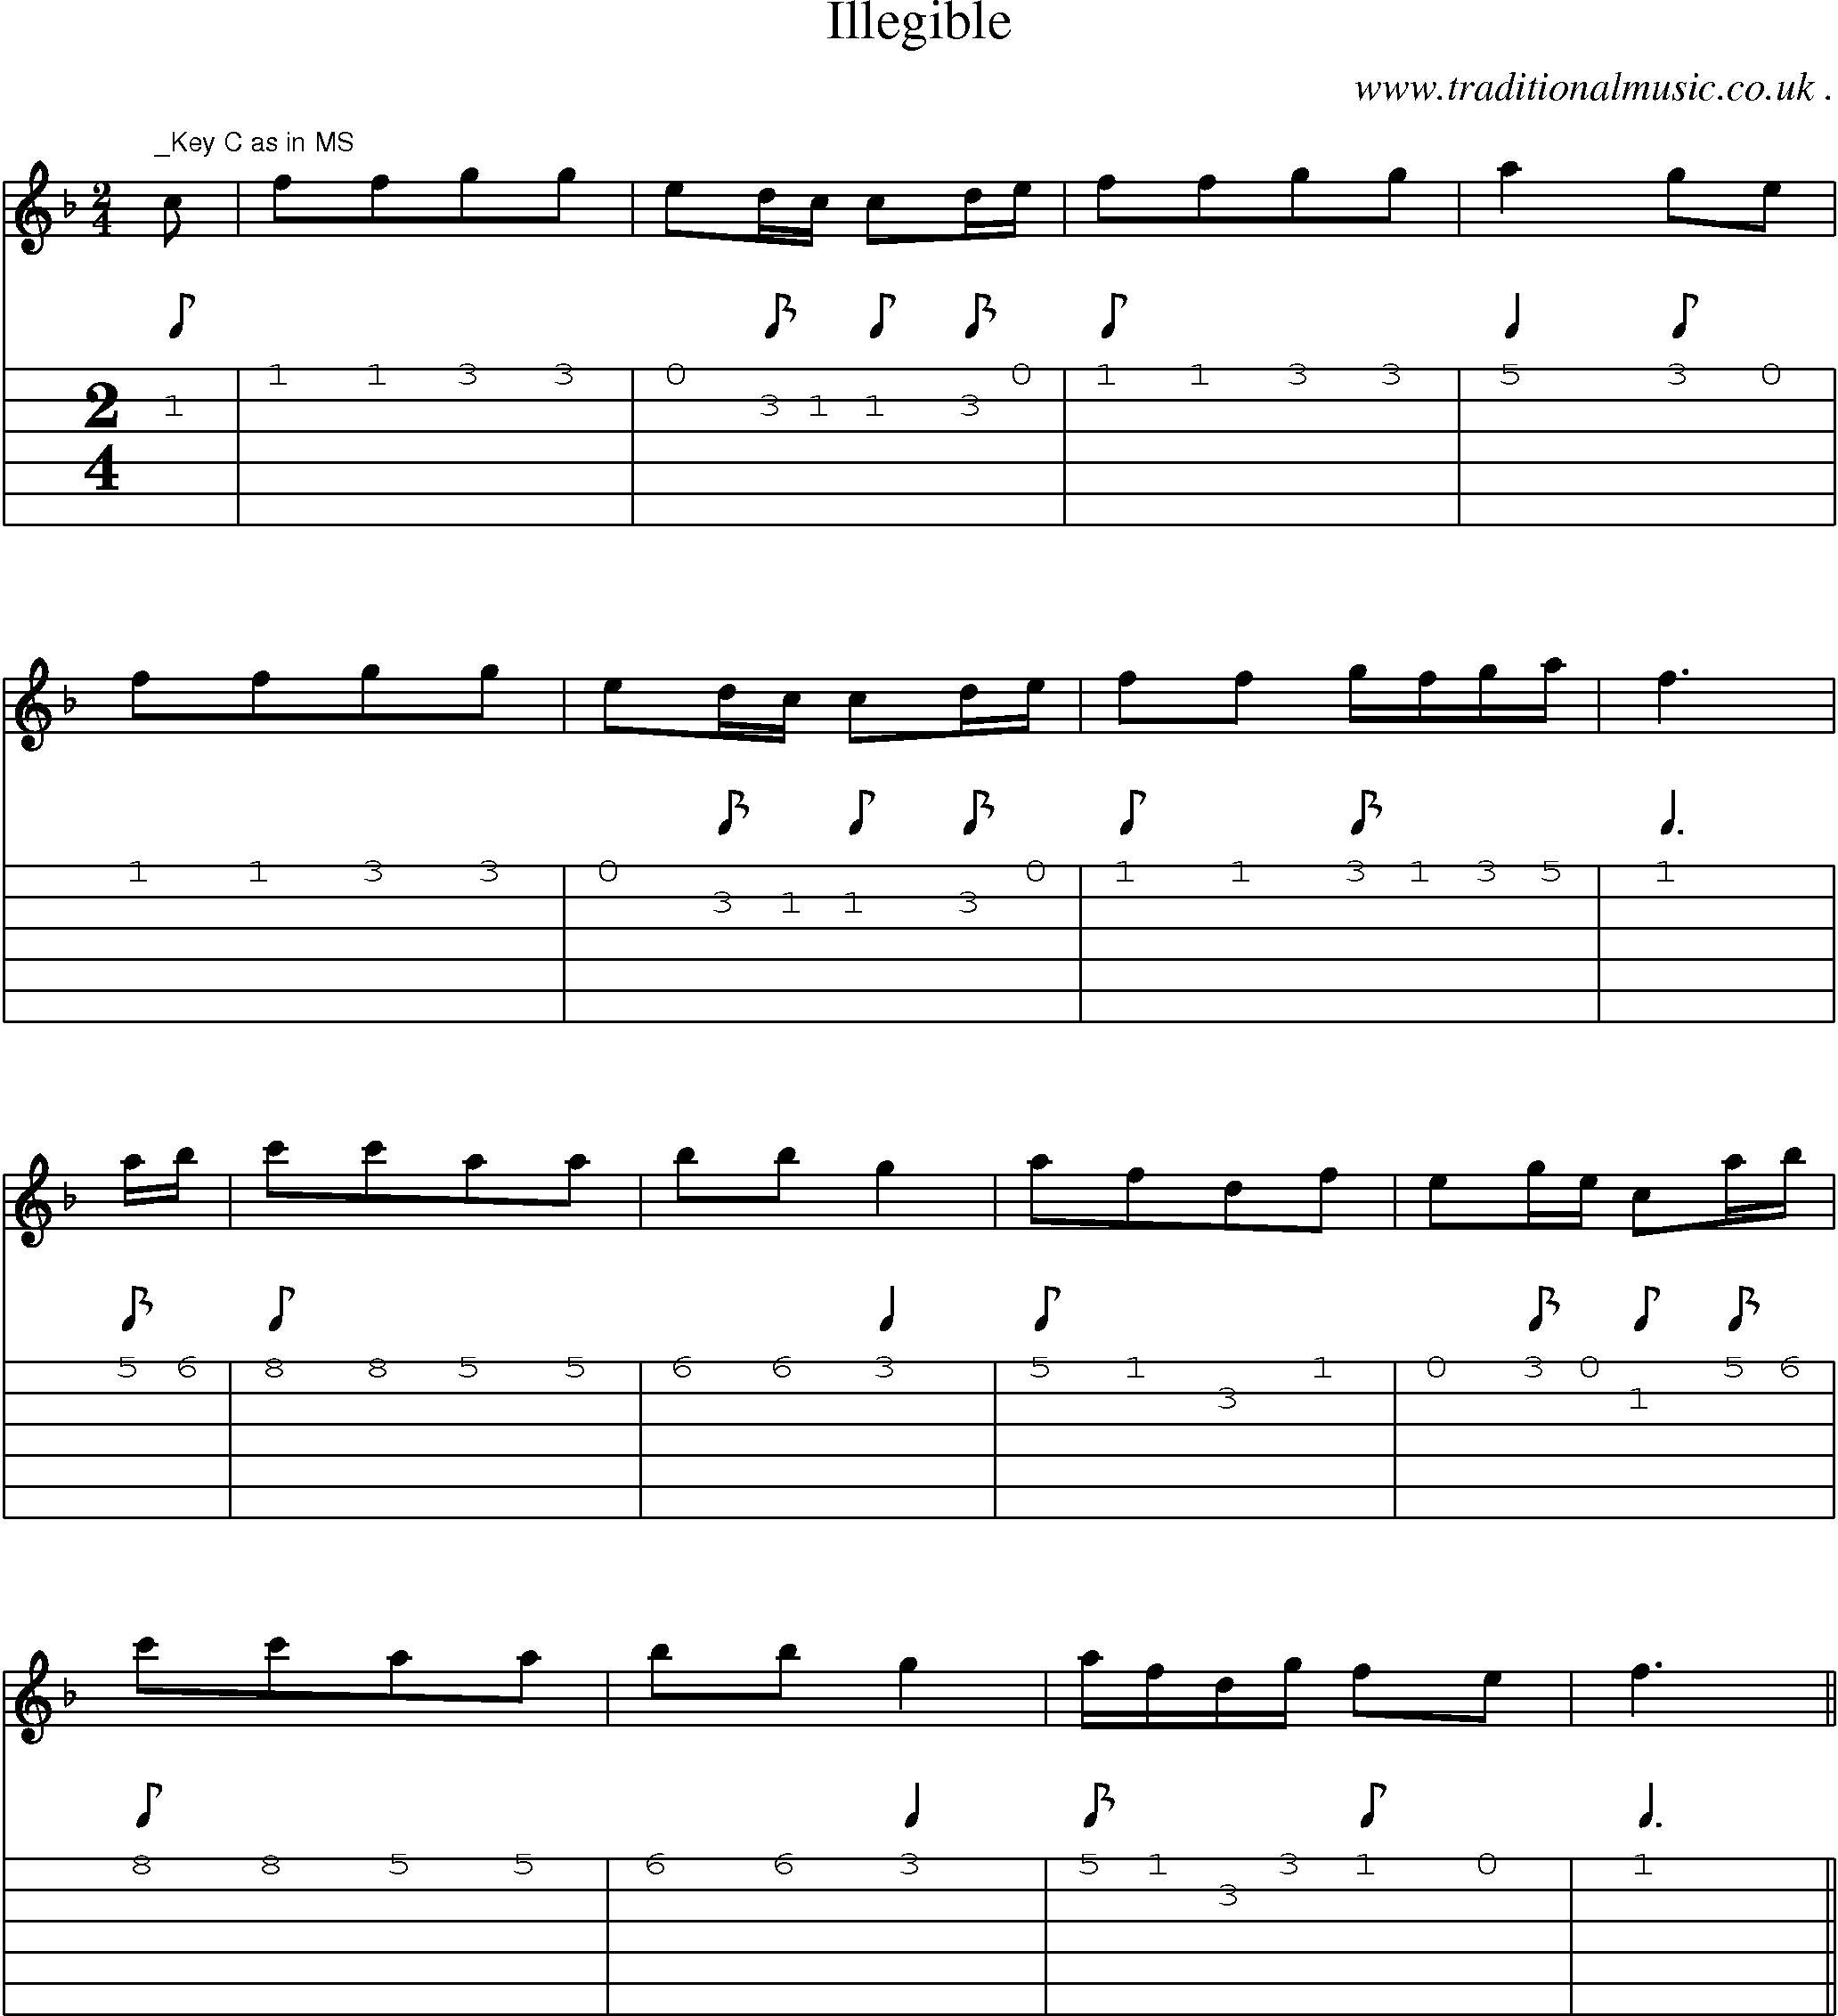 Sheet-Music and Guitar Tabs for Illegible